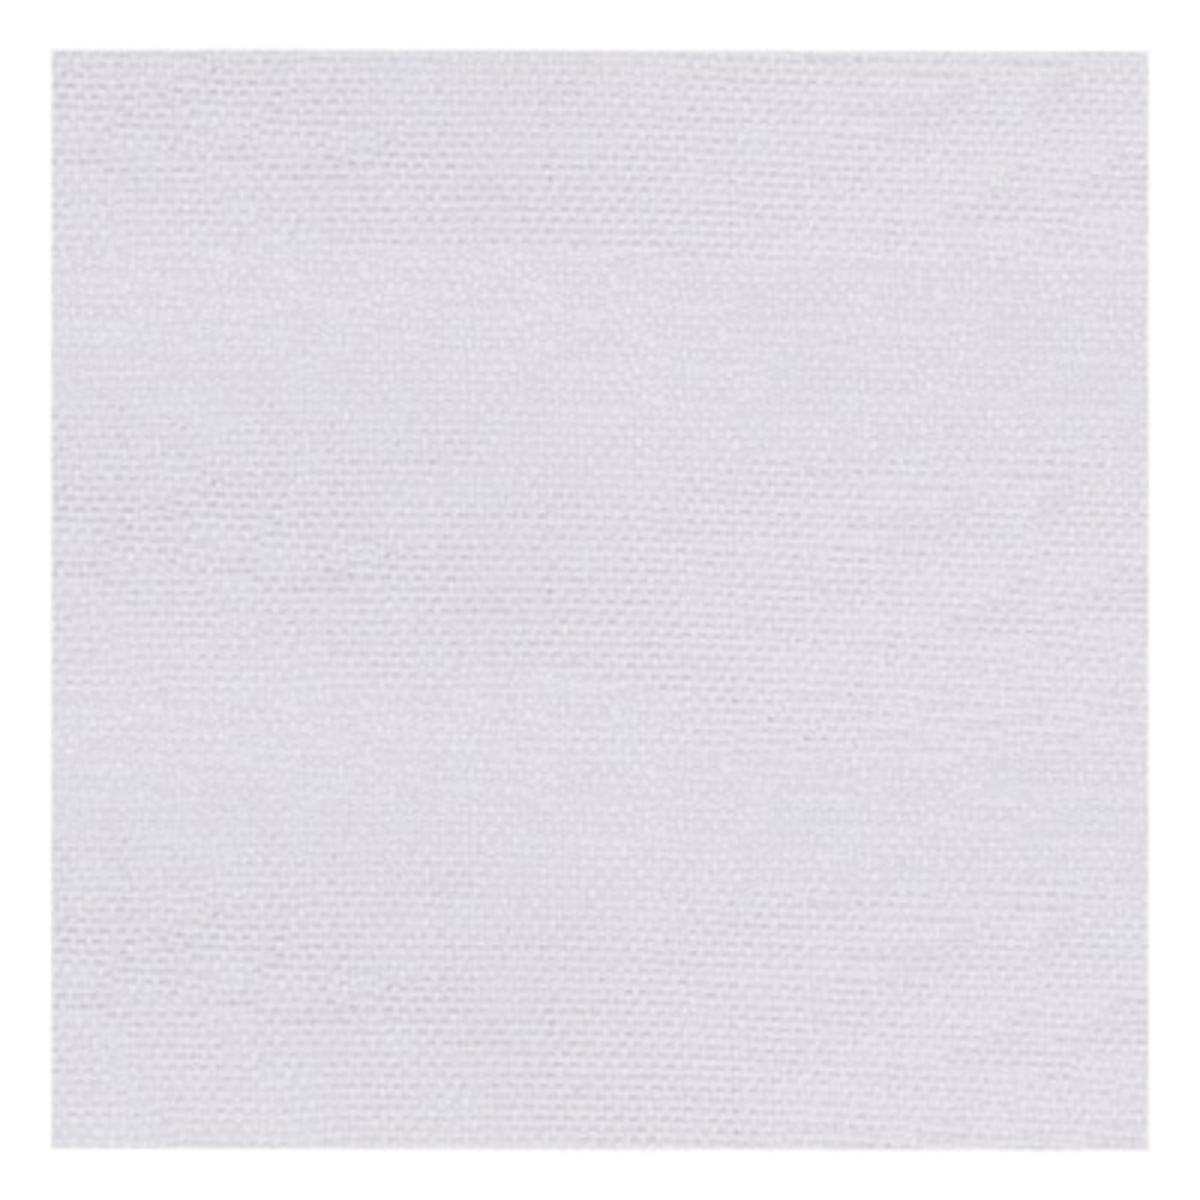 Tillman 6 X 8 White .030 18 Ounce Uncoated Fiberglass Light Duty Welding Blanket With Grommets On 18 Centers On All Sides 